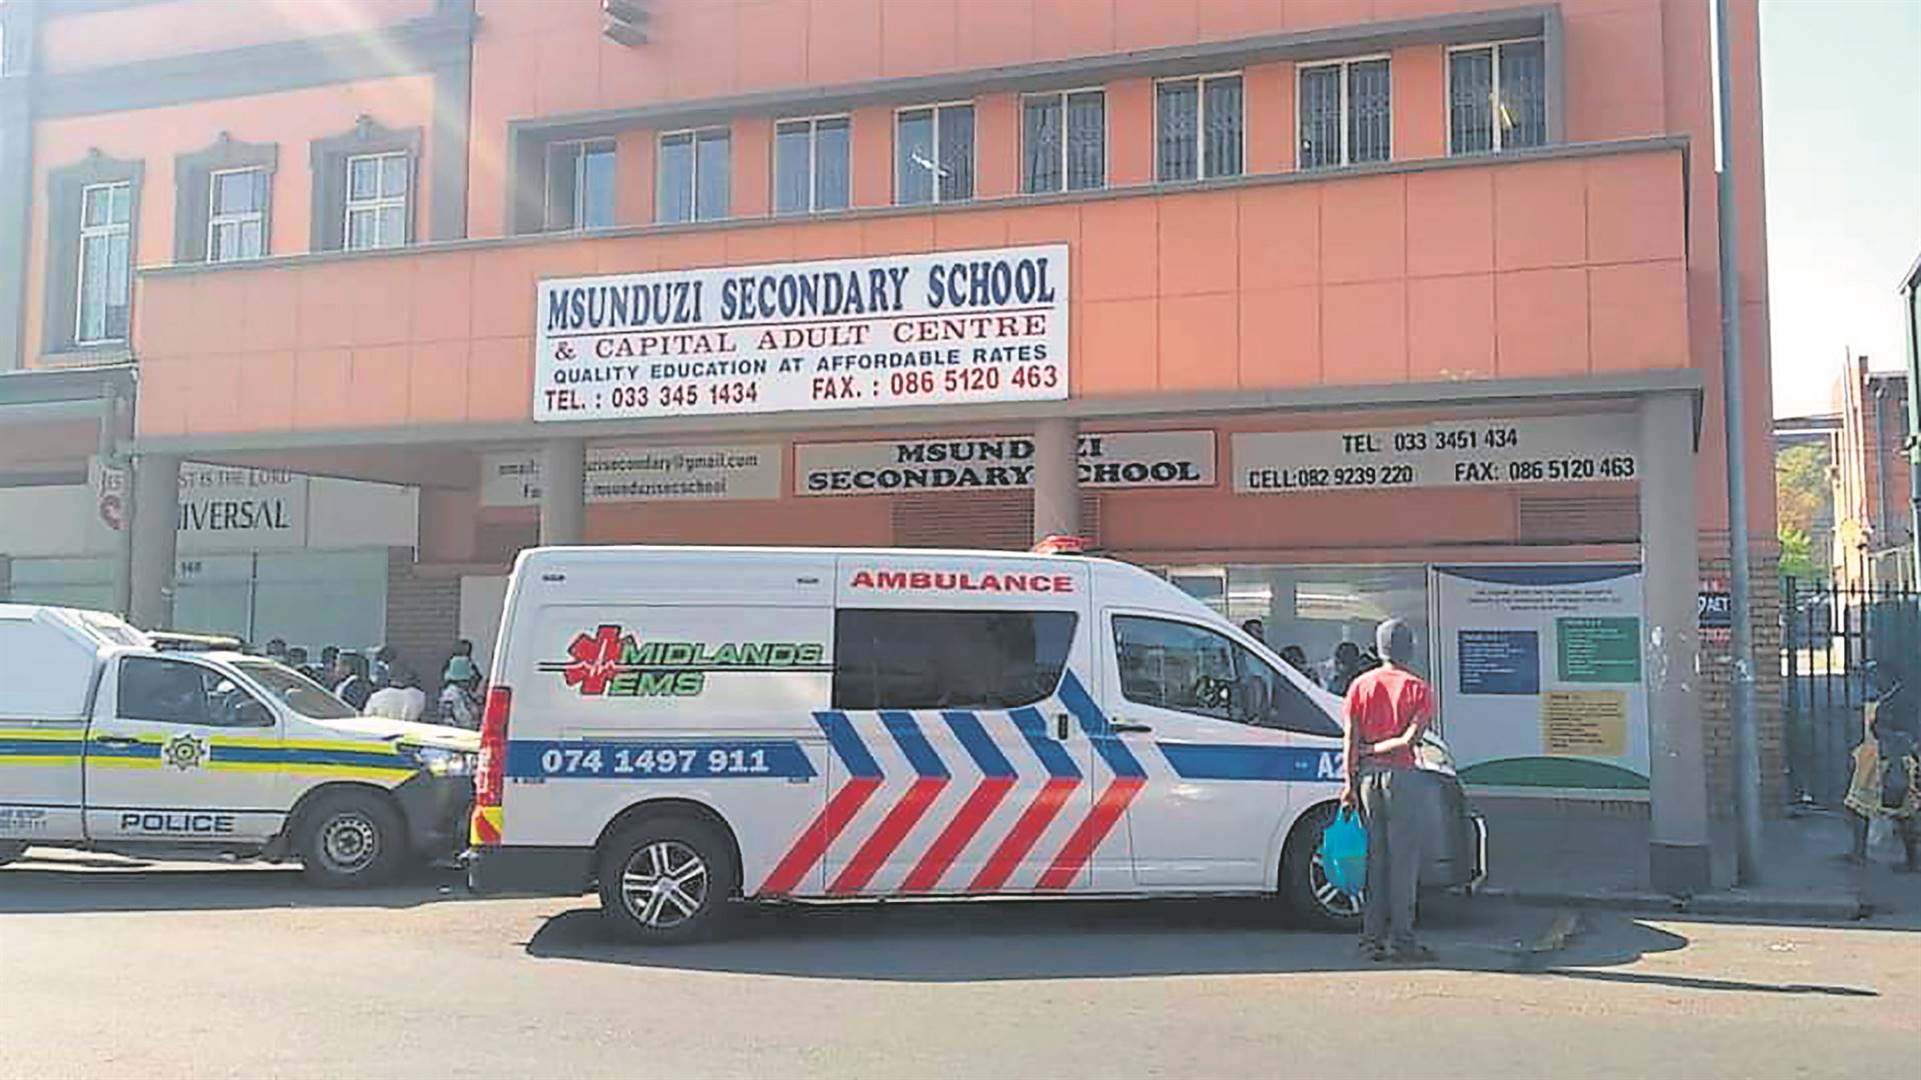 A scene of the shooting incident at Msunduzi Secondary School where a 66-year-old man lost his life yesterday. Outside the